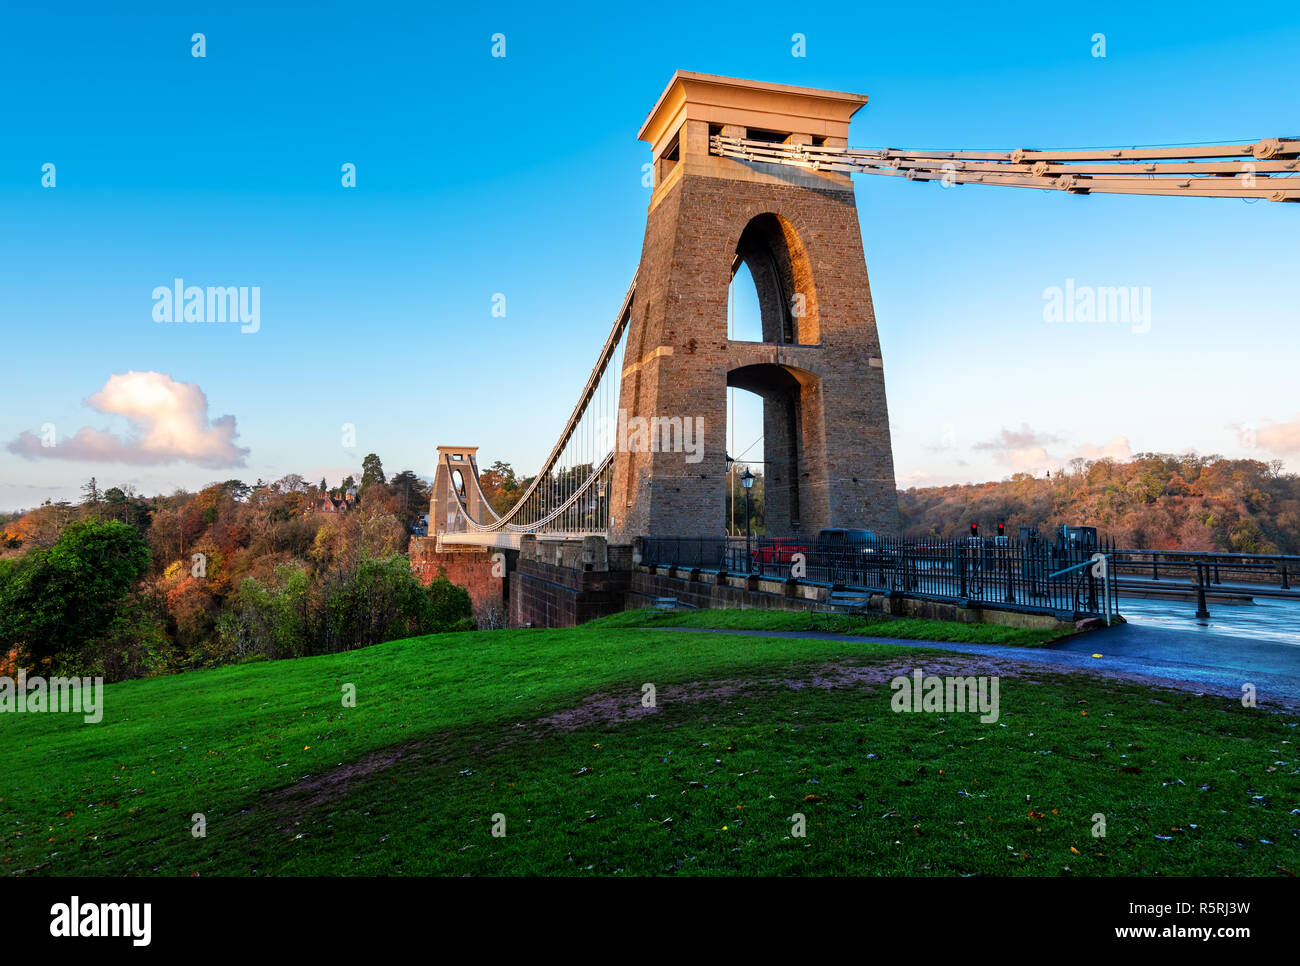 Clifton Suspension Bridge in early morning light, Bristol, Avon, England, UK Banque D'Images